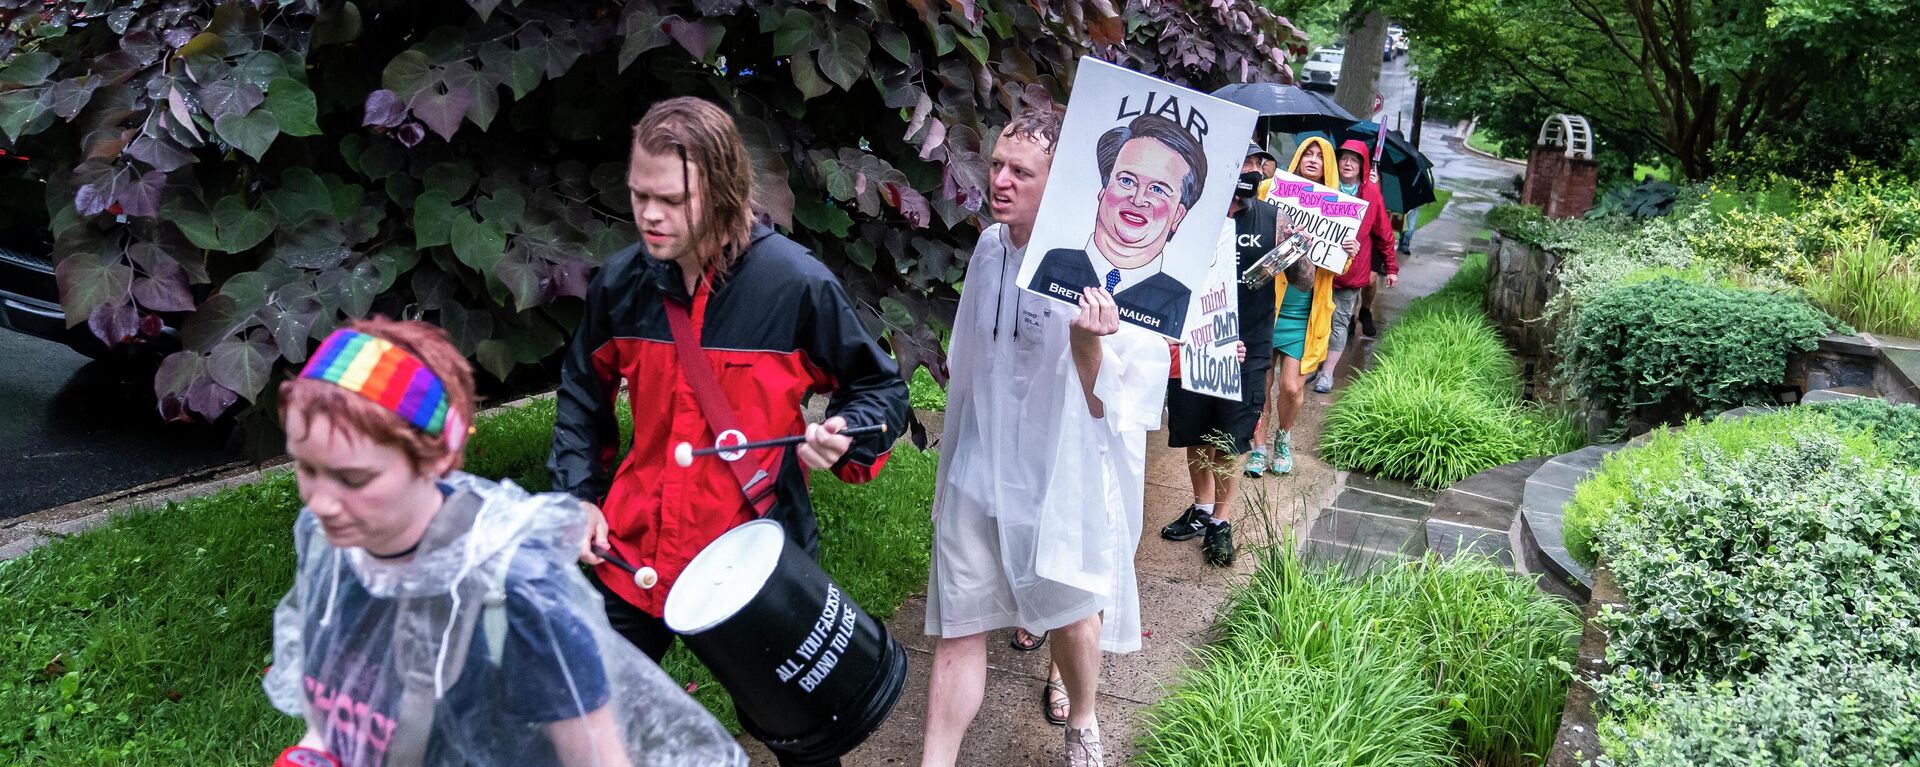 CHEVY CHASE, MD - JUNE 08: Protesters march past Supreme Court Justice Brett Kavanaugh's home on June 8, 2022 in Chevy Chase, Maryland. An armed man was arrested near Kavanaugh's home Wednesday morning as the court prepares to announce decisions for about 30 cases - Sputnik International, 1920, 09.06.2022